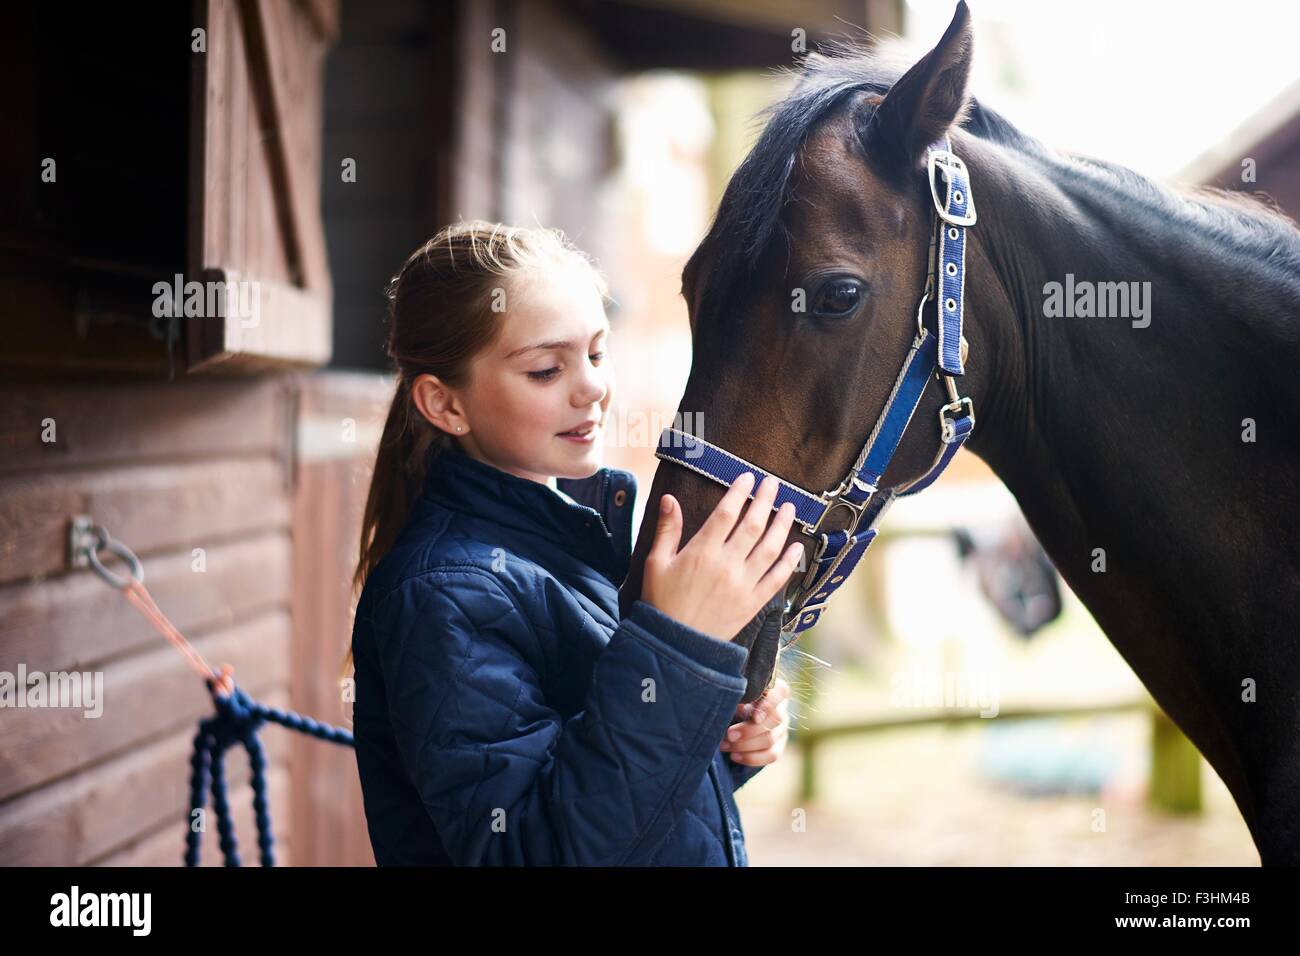 Girl petting horse cavalier Banque D'Images